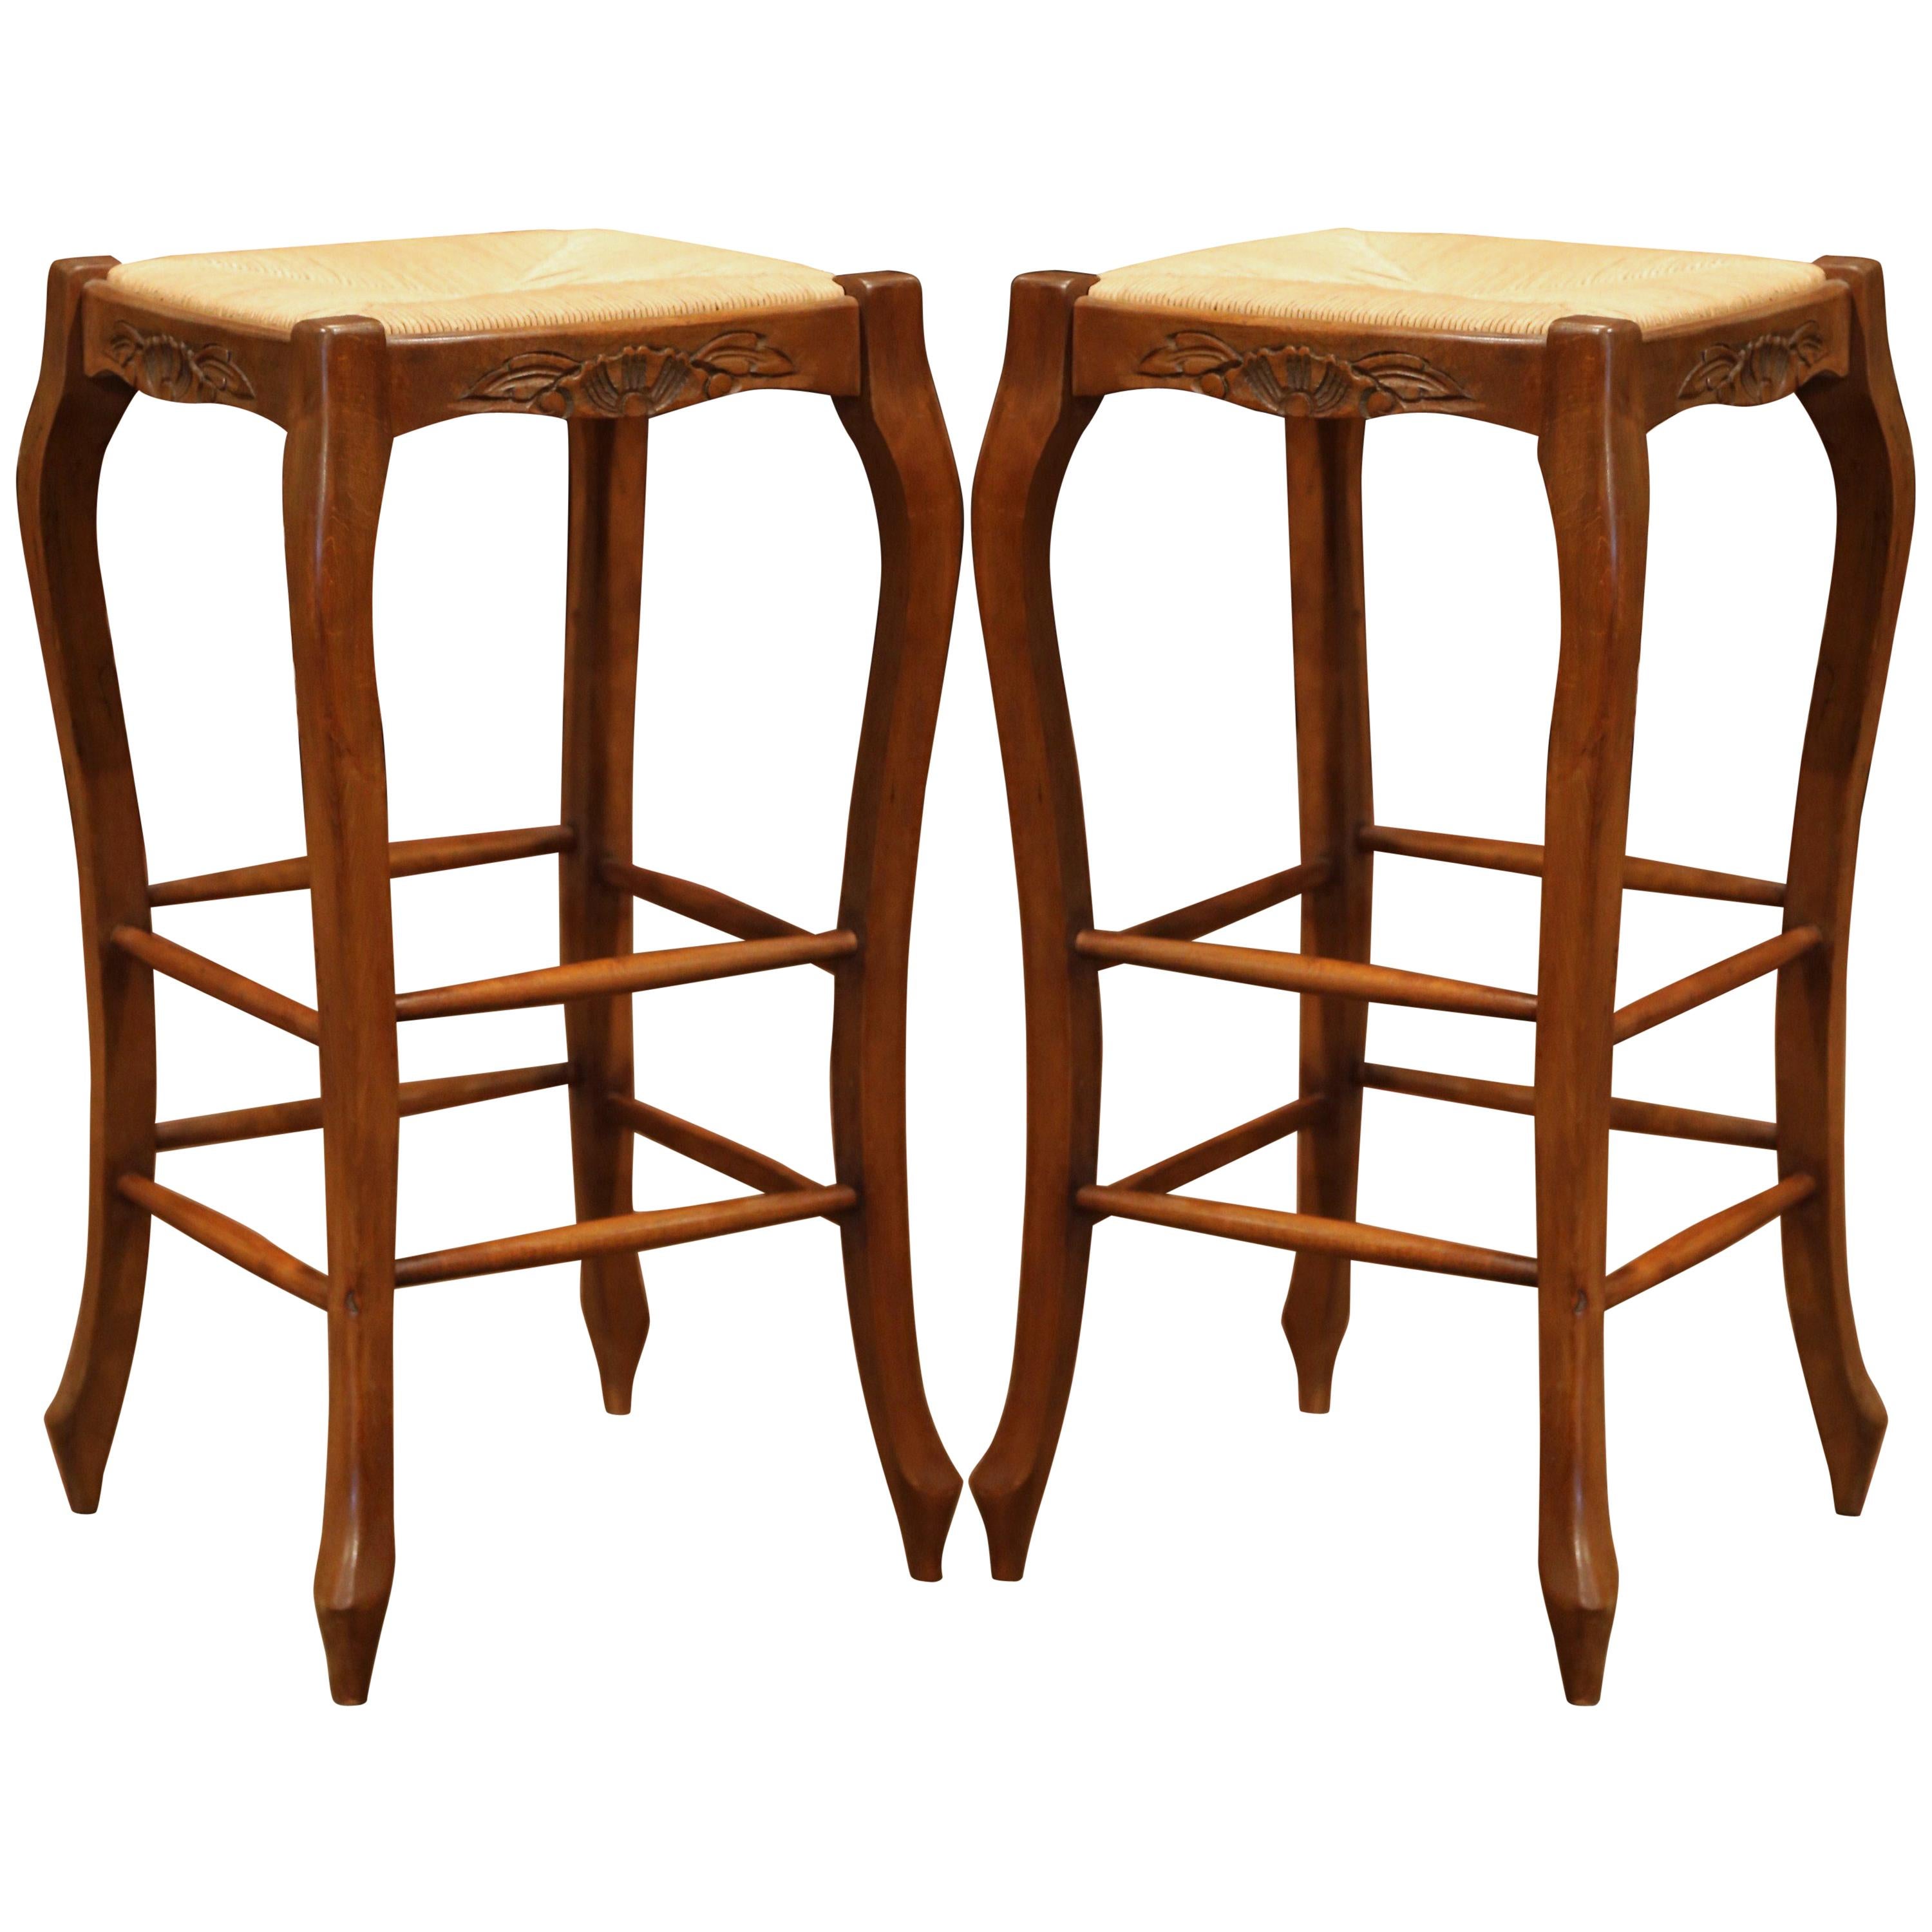 Pair of French Louis XV Carved Beech Wood Bar Stools with Rush Seat